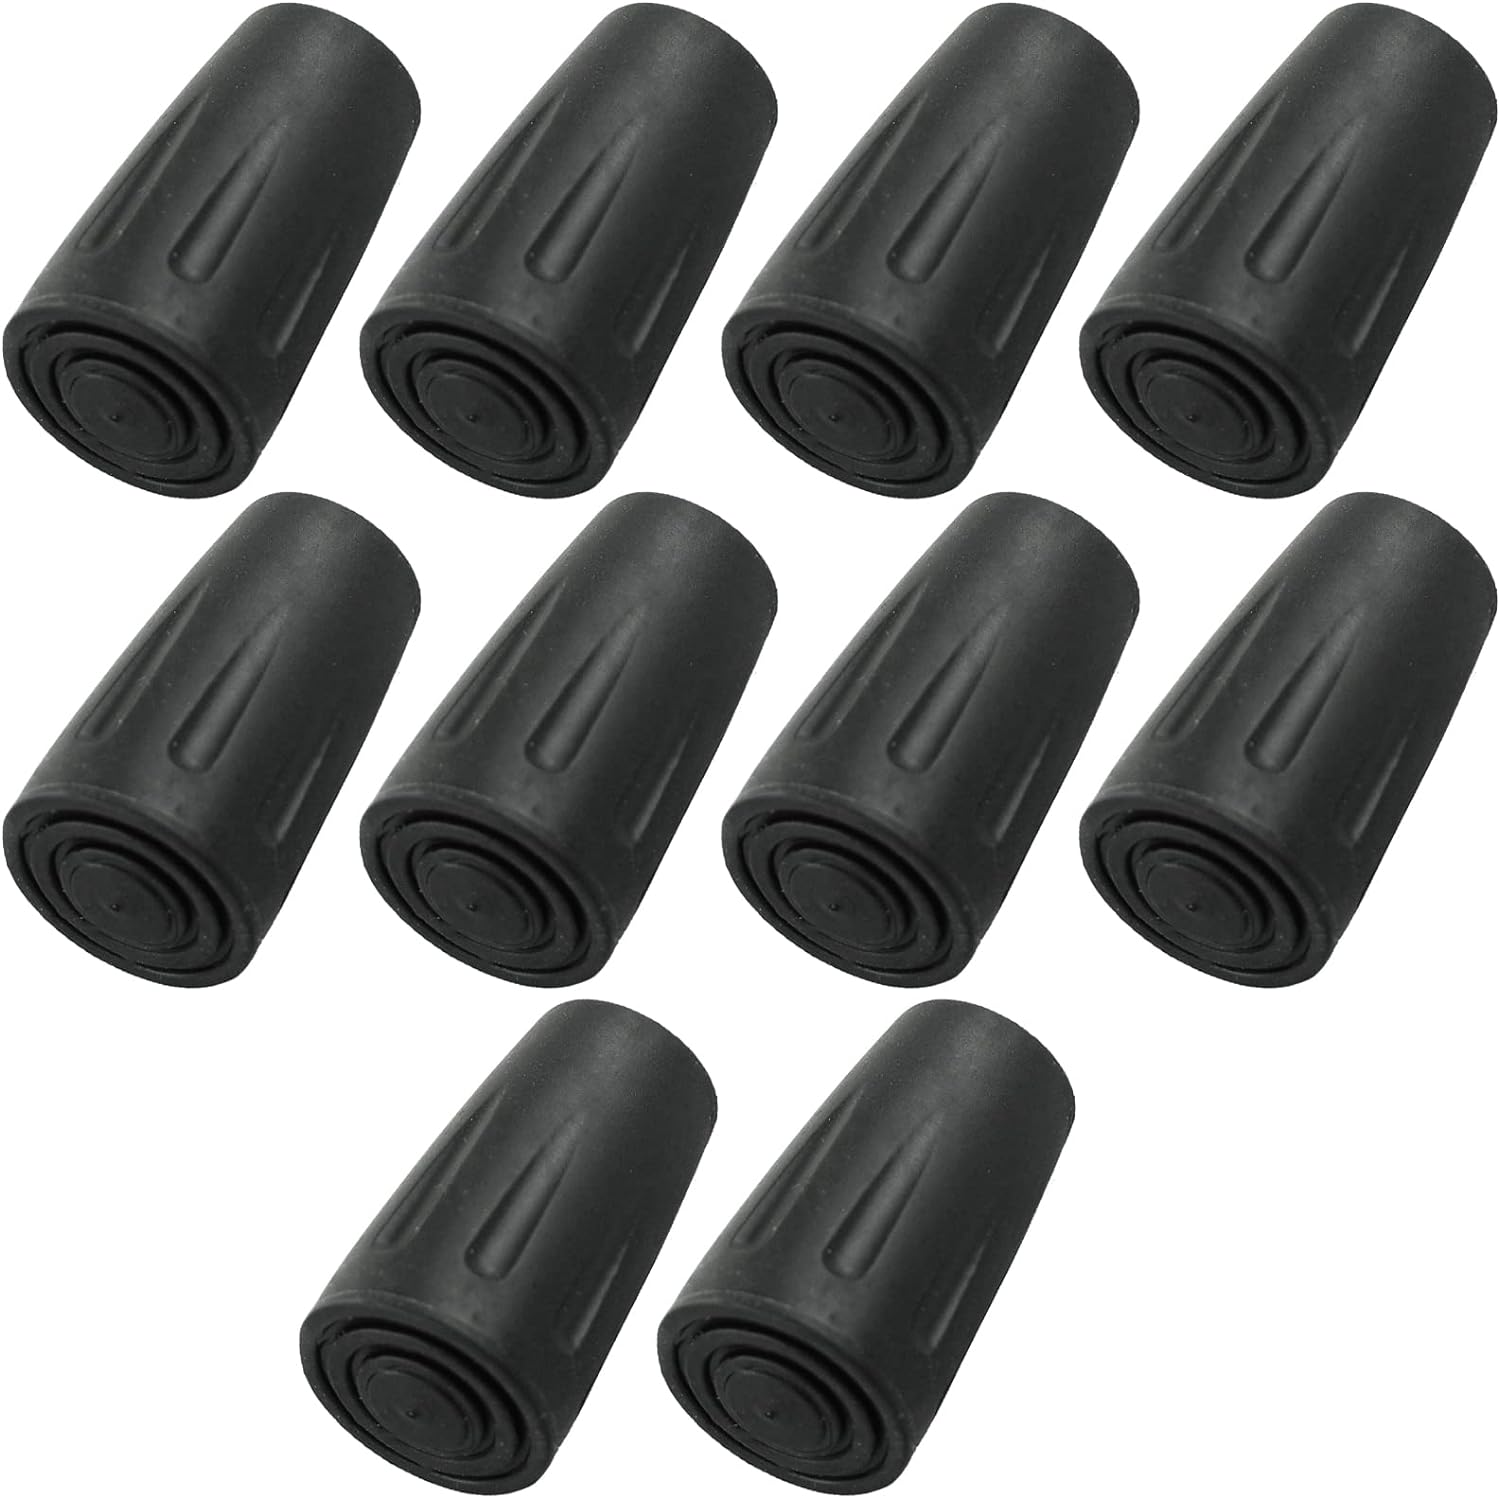 Walking Stick Rubber Tips,Walking Stick Ferrules,11mm Spare Replacement Rubber Pole Ends Trekking Poles Caps,for Hiking Camping Climbing 10 PCS (Black)